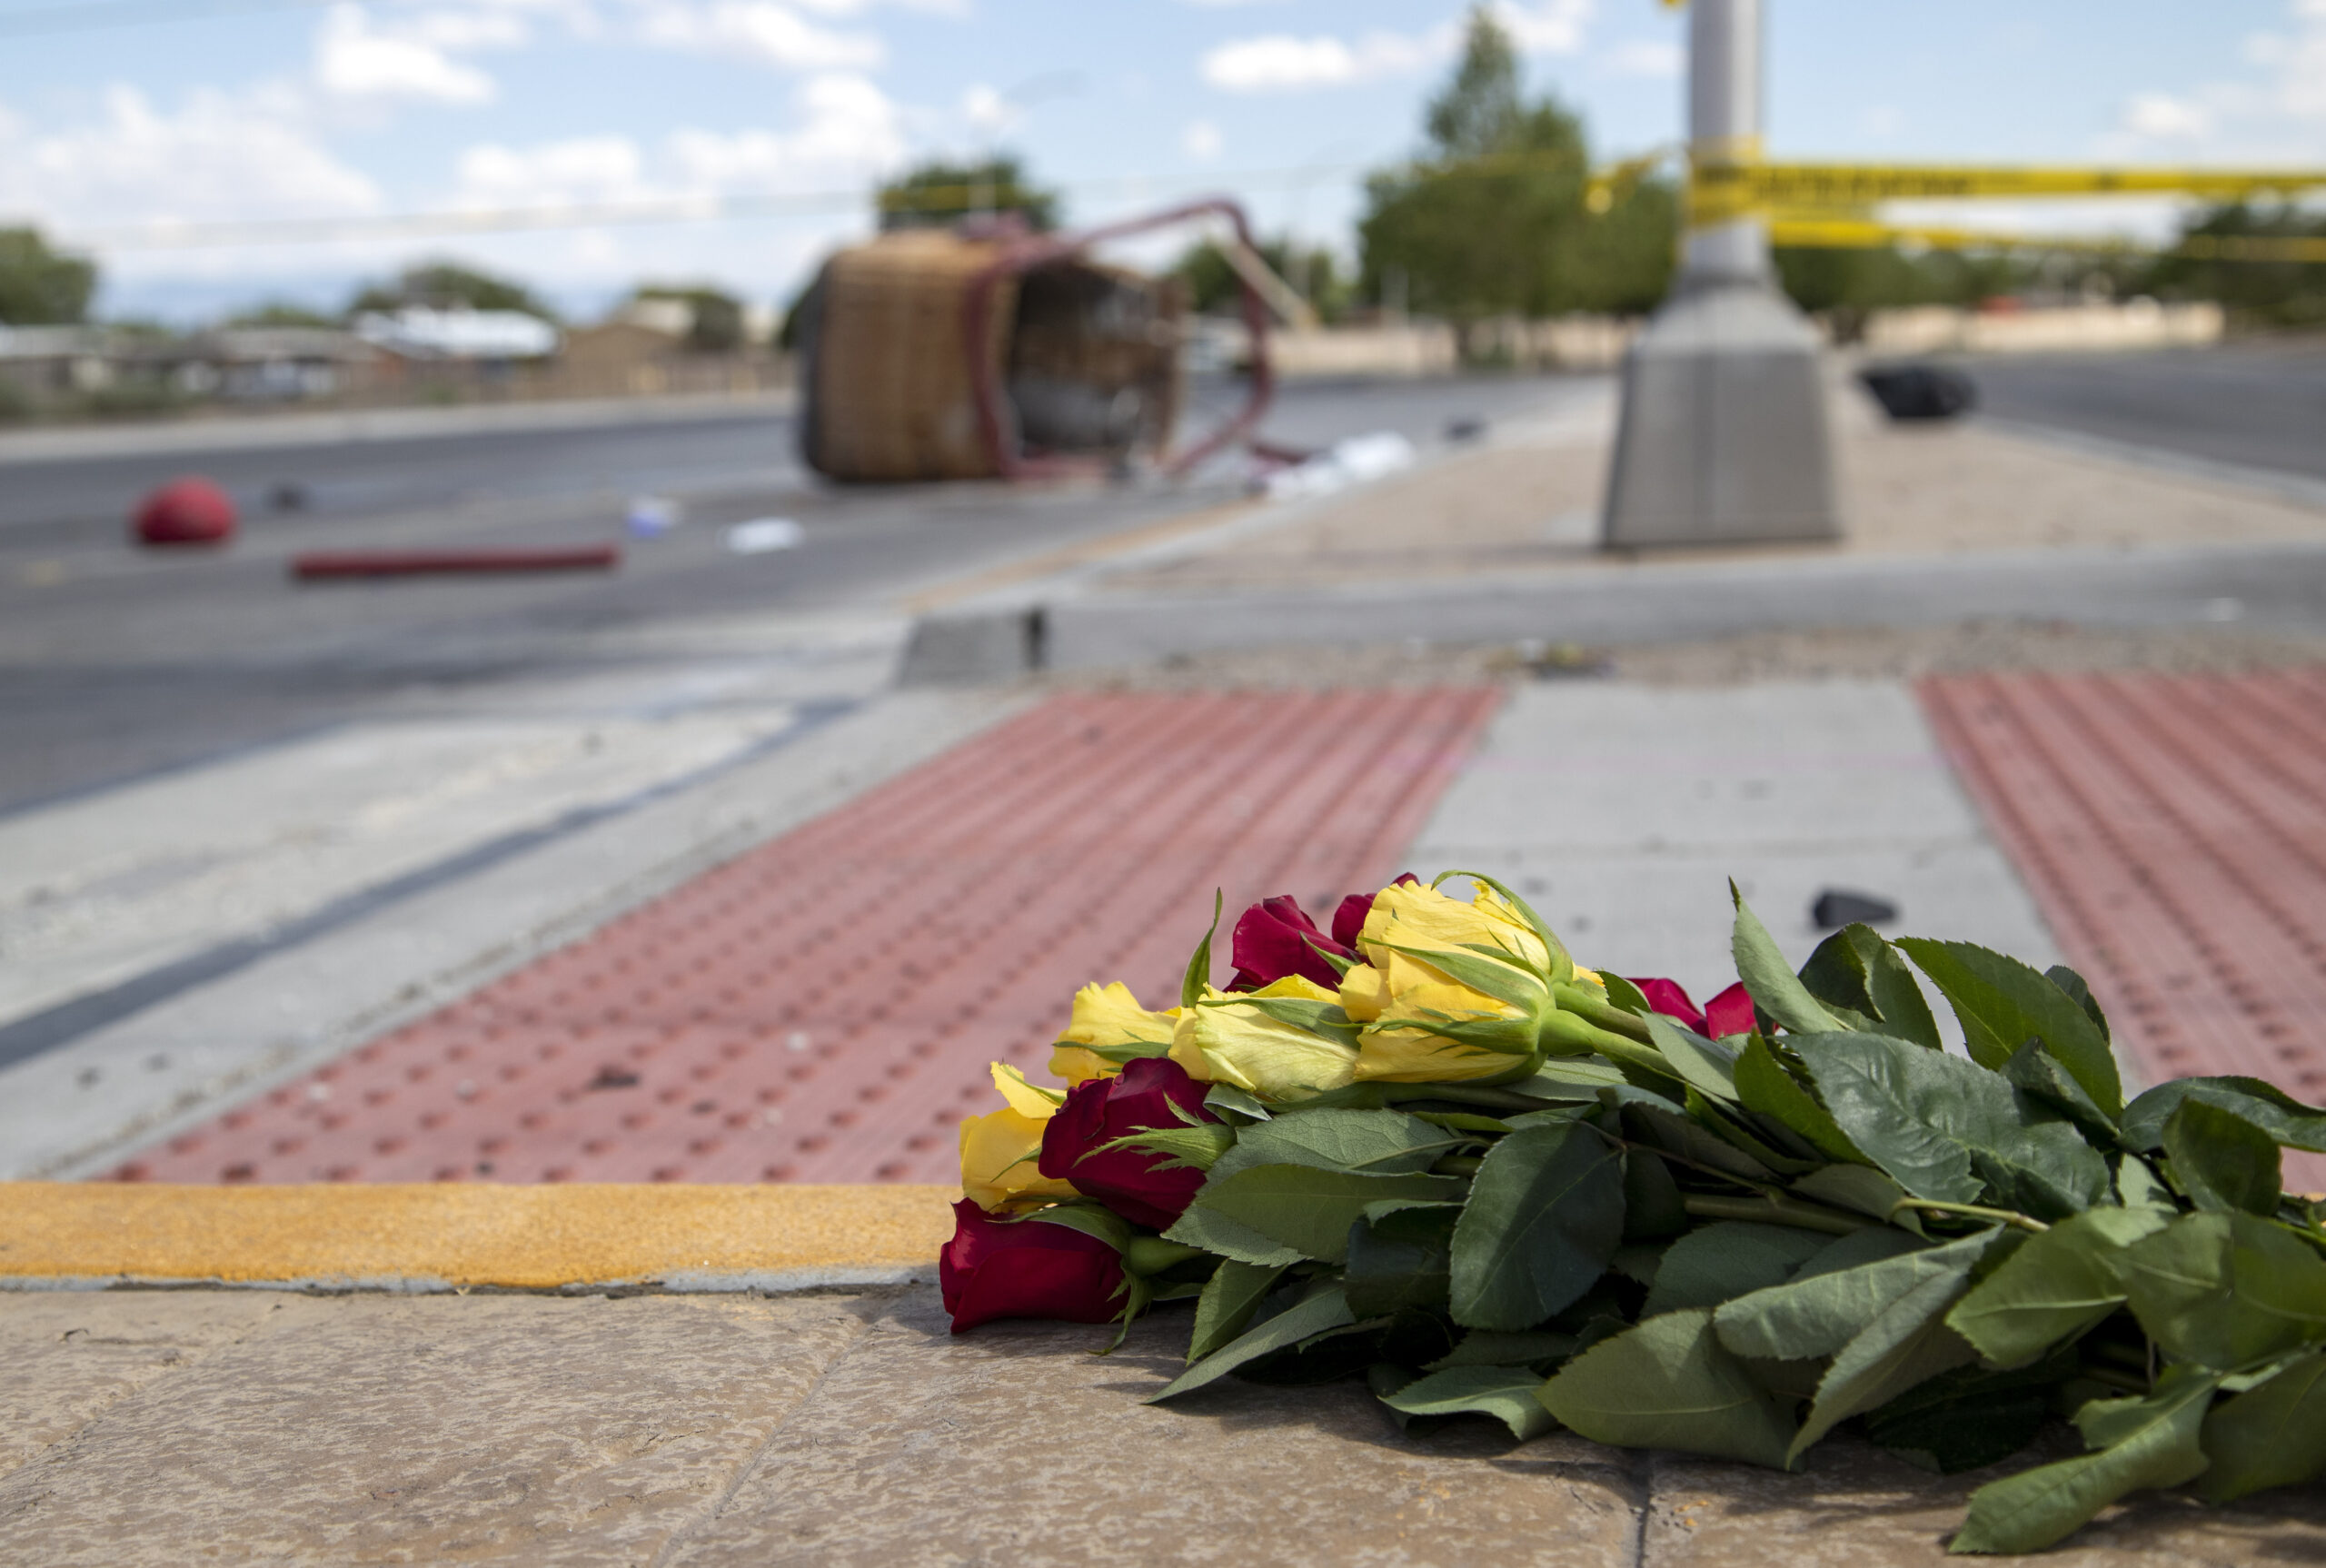 A bouquet of flowers from a mourner is placed near the basket of a hot air balloon which crashed in Albuquerque, N.M., Saturday, June 26, 2021. Police said the five occupants died after it crashed on the busy street. (AP Photo/Andres Leighton)